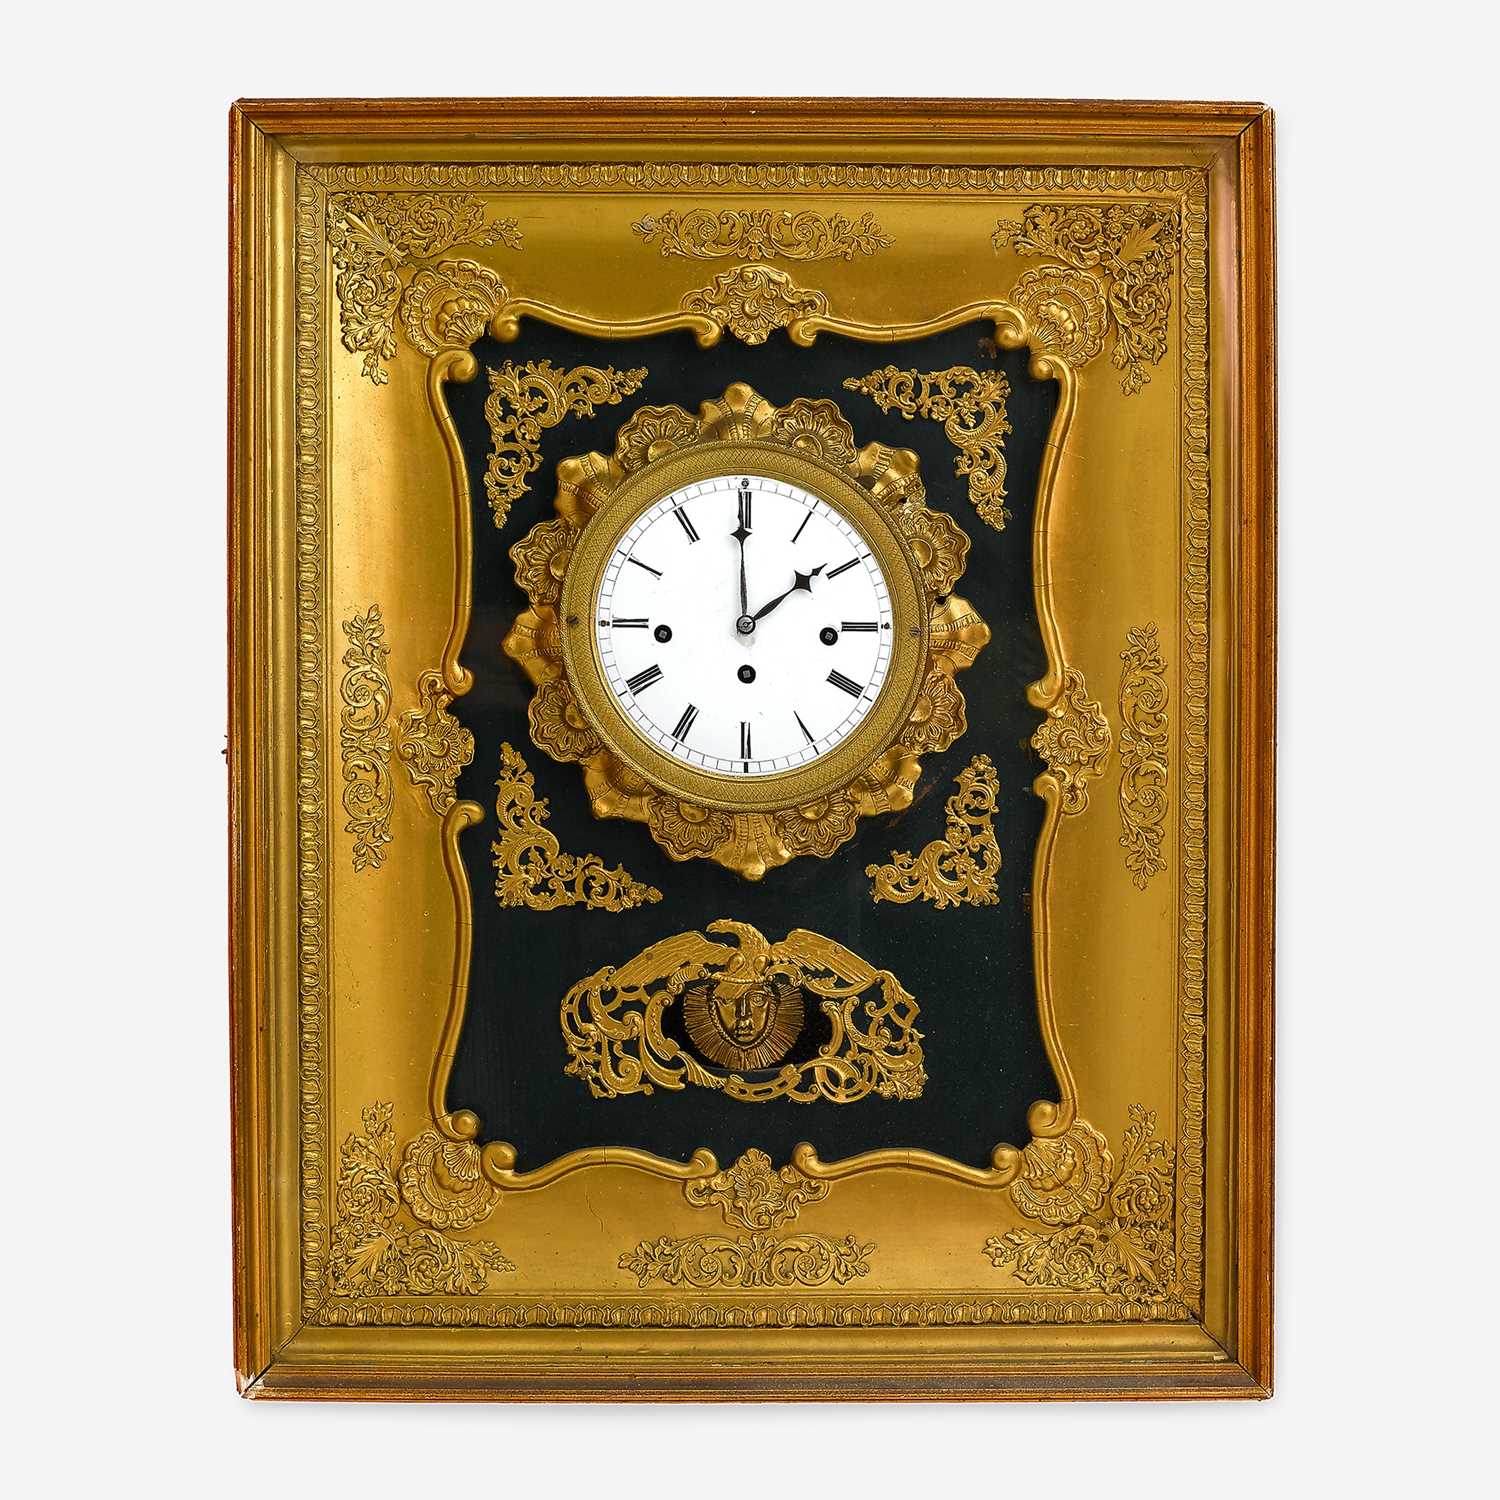 Lot 56 - An Unusual French Gilt Bronze, Gilt and Green Painted Wood Wall Clock